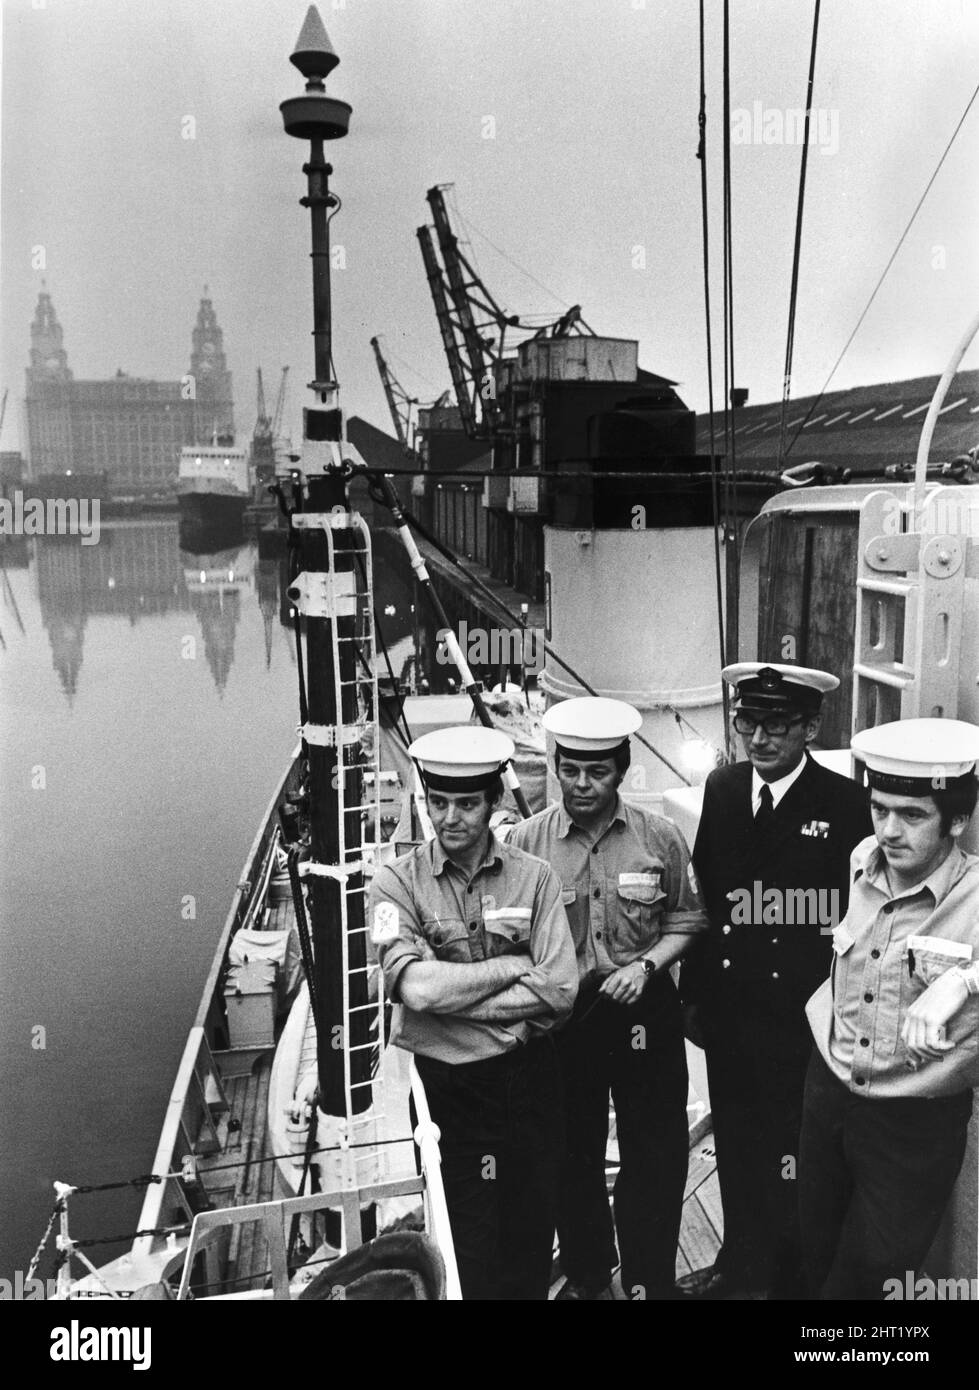 Sailors and Naval officer on board minesweeper HMS Mersey, based at the training centre for the Royal Naval Reserve HMS Eaglet.  In the background is the Liver Building on the Liverpool waterfront. Circa  1966. Stock Photo